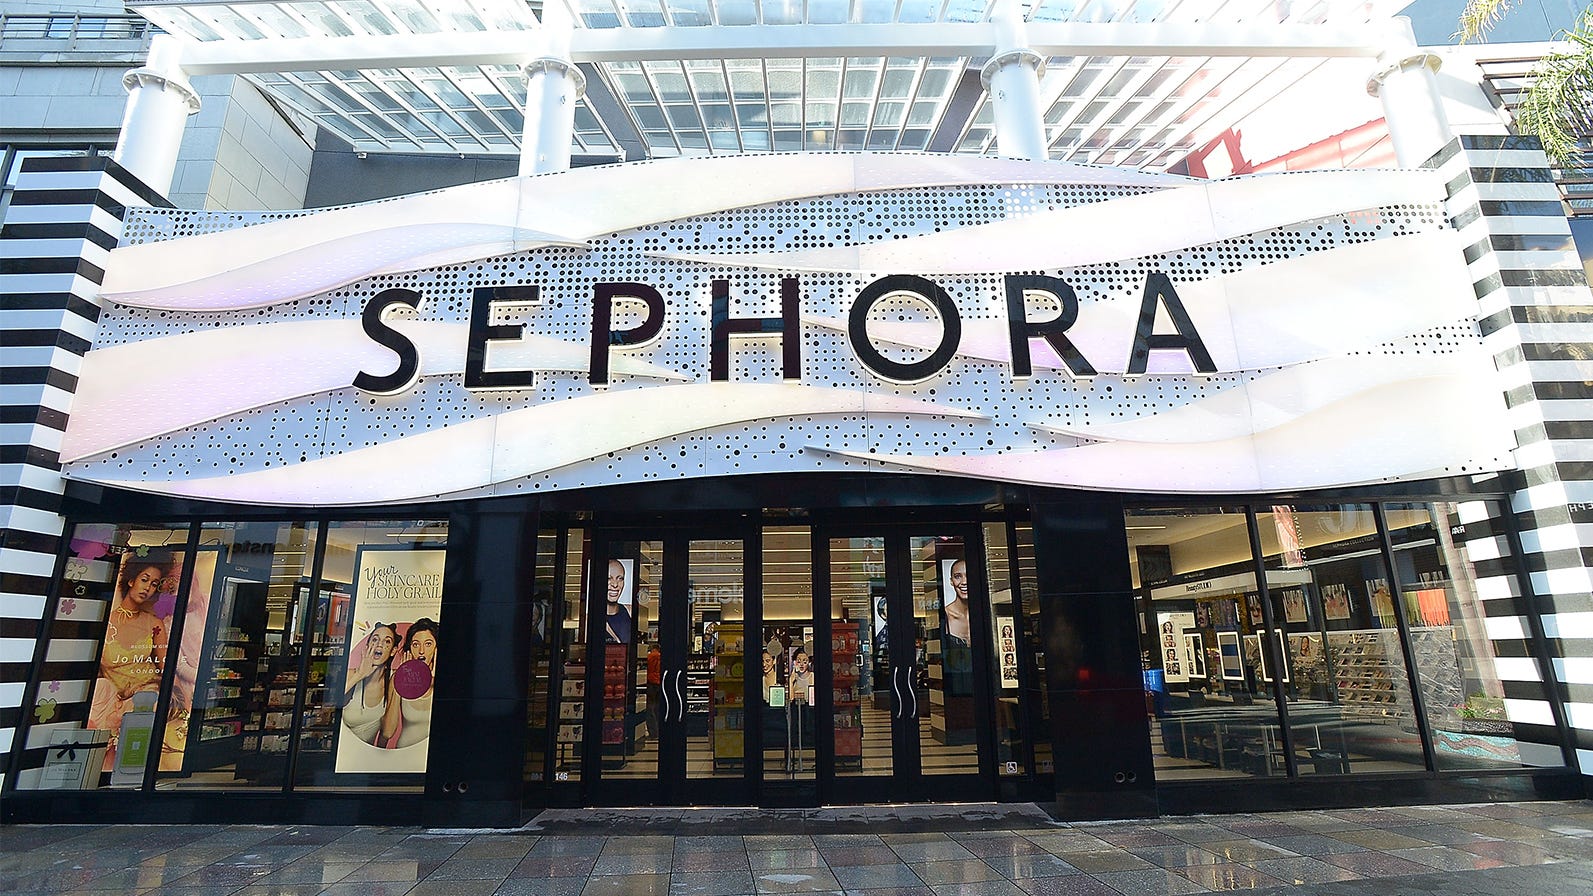 Black Friday 2020: The best Sephora deals on Sunday Riley, Kate Somerville, Too Faced and more